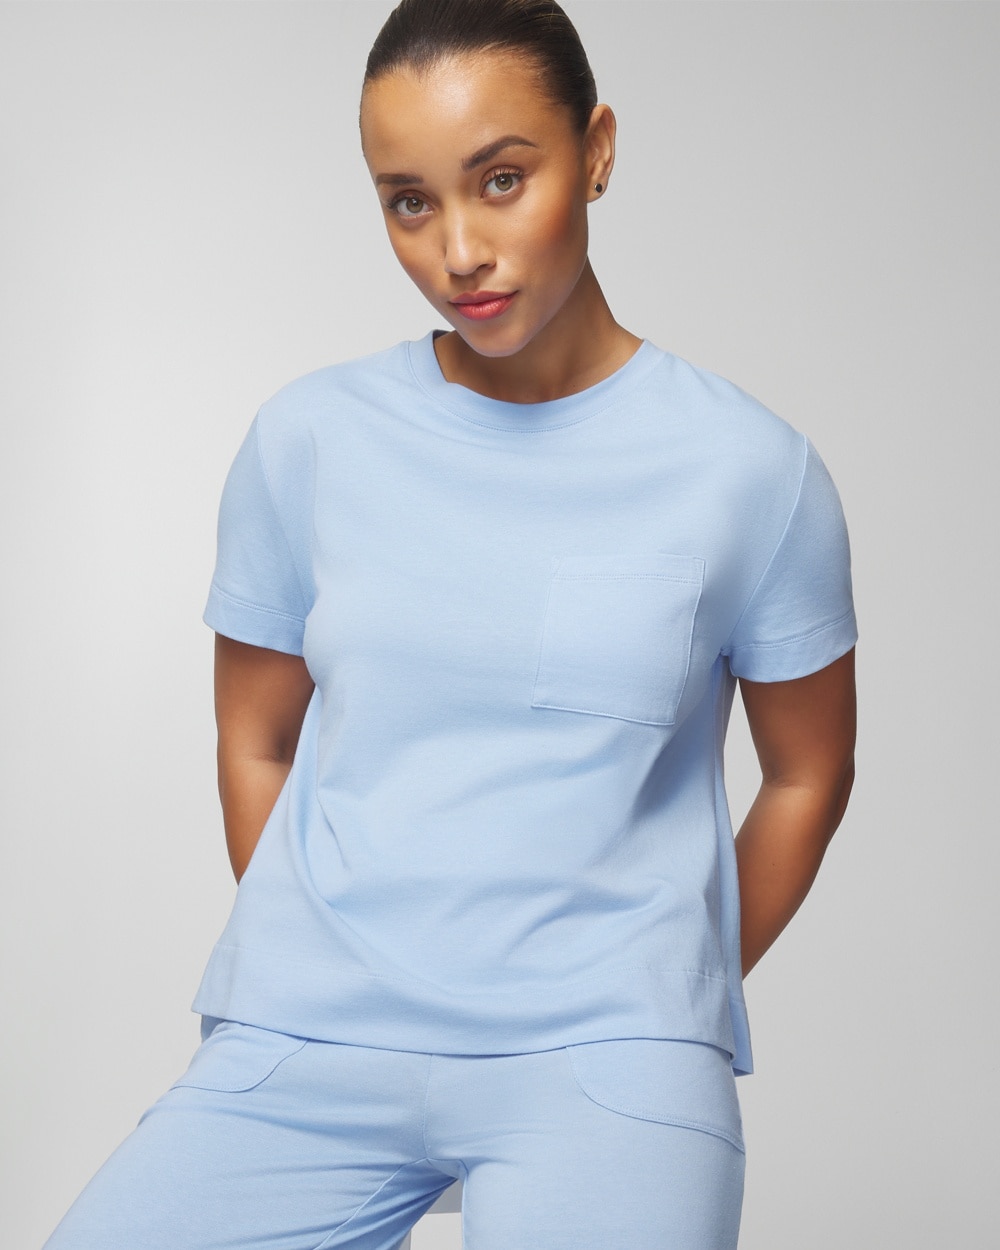 Most Loved Cotton Short-Sleeve Pocket Tee - WA